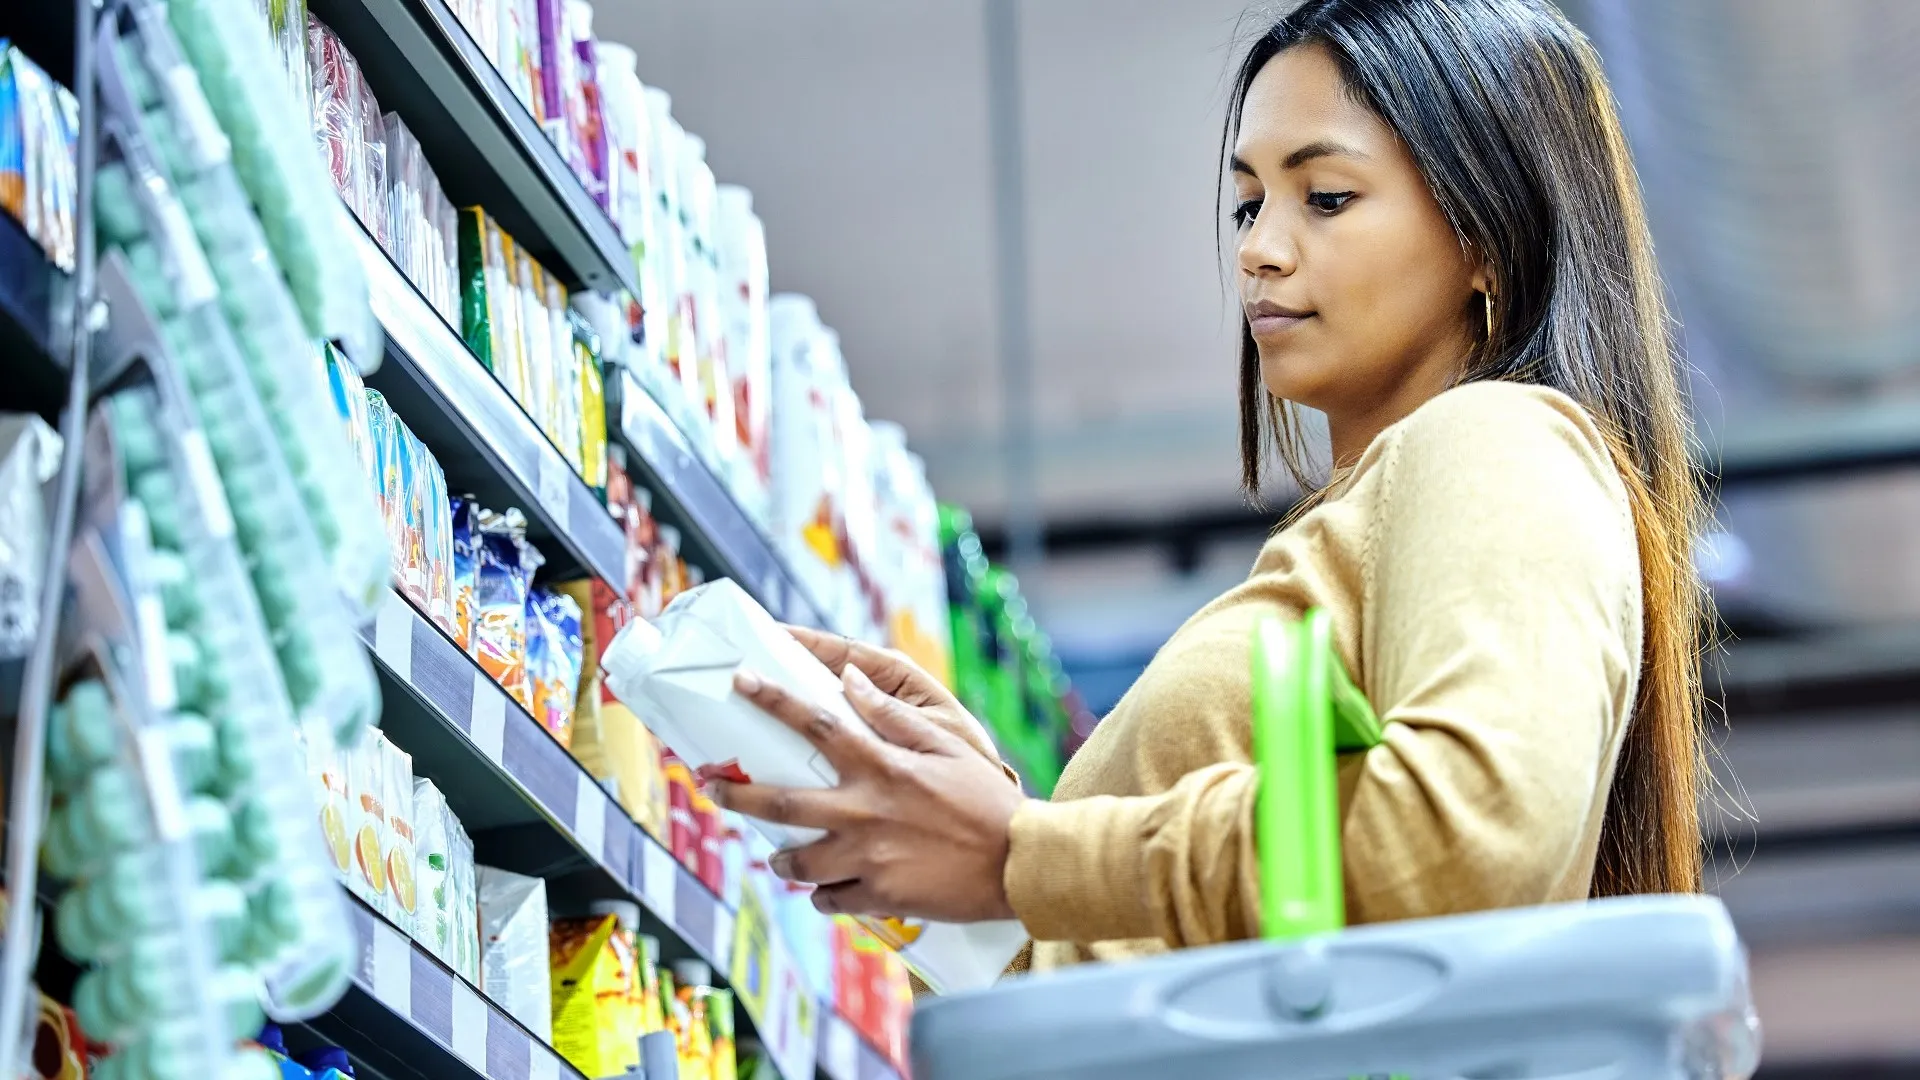 Shot of a young woman shopping at a grocery store stock photo